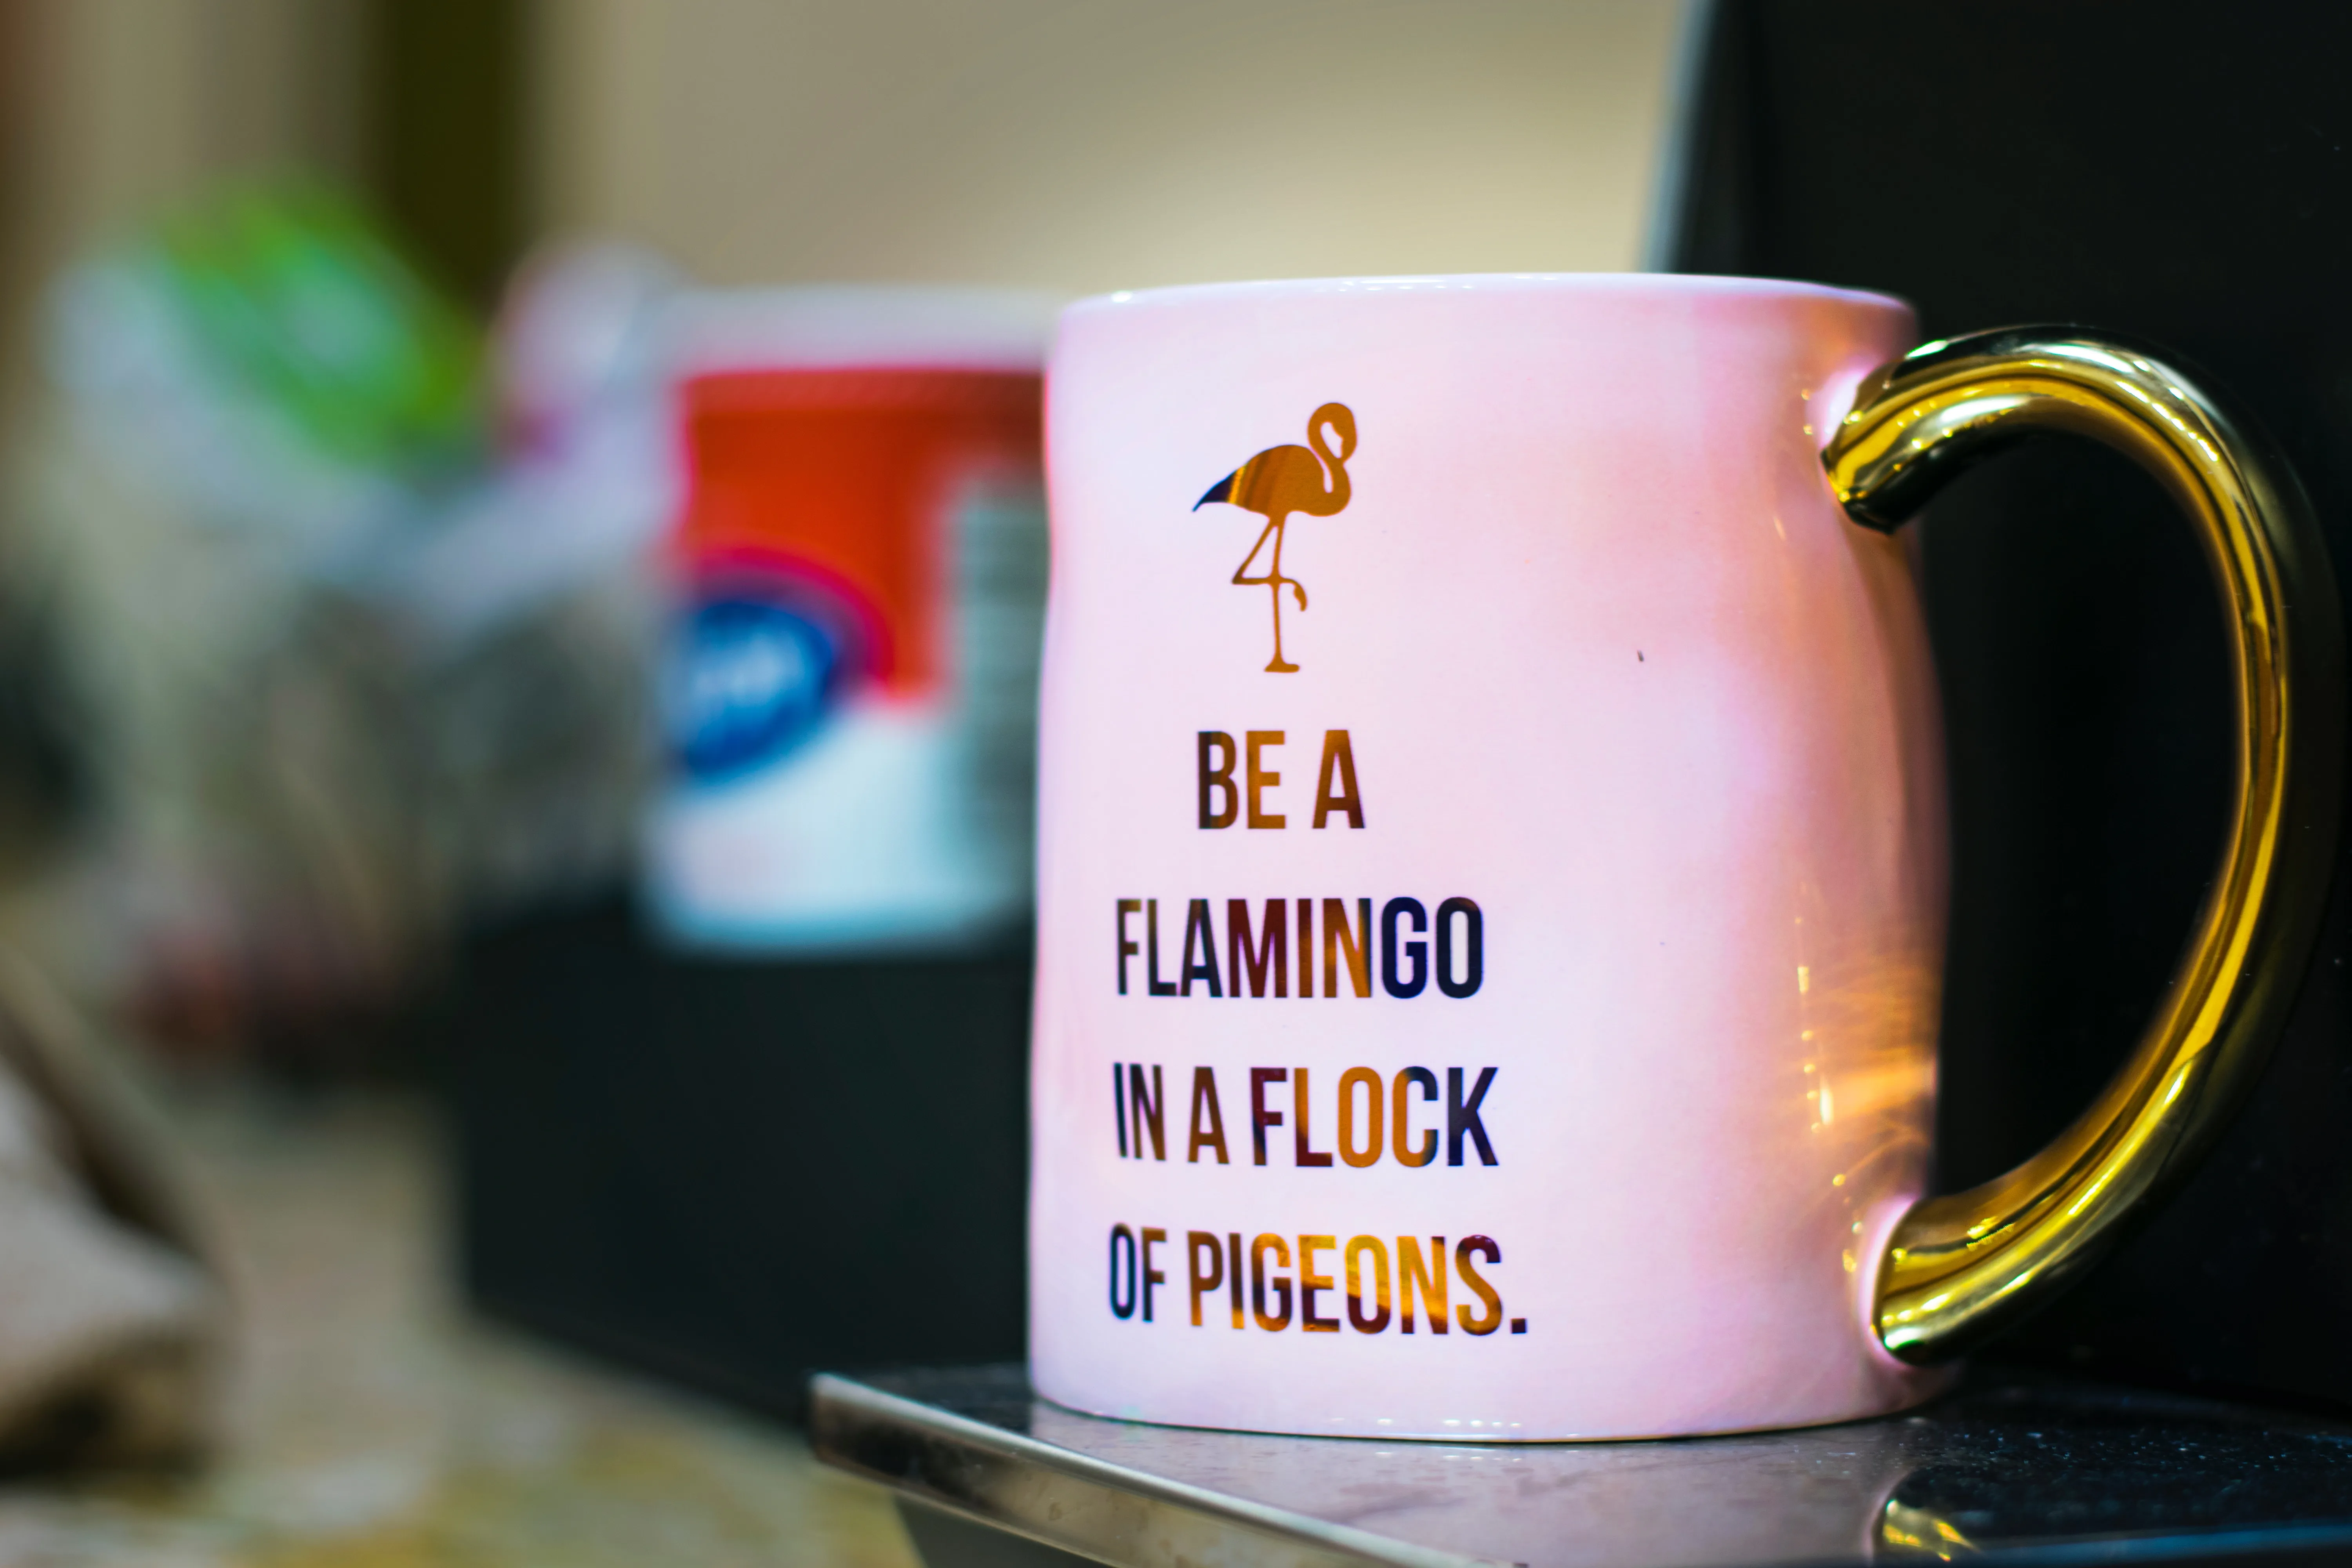 be a flamingo in a flock of pigeons